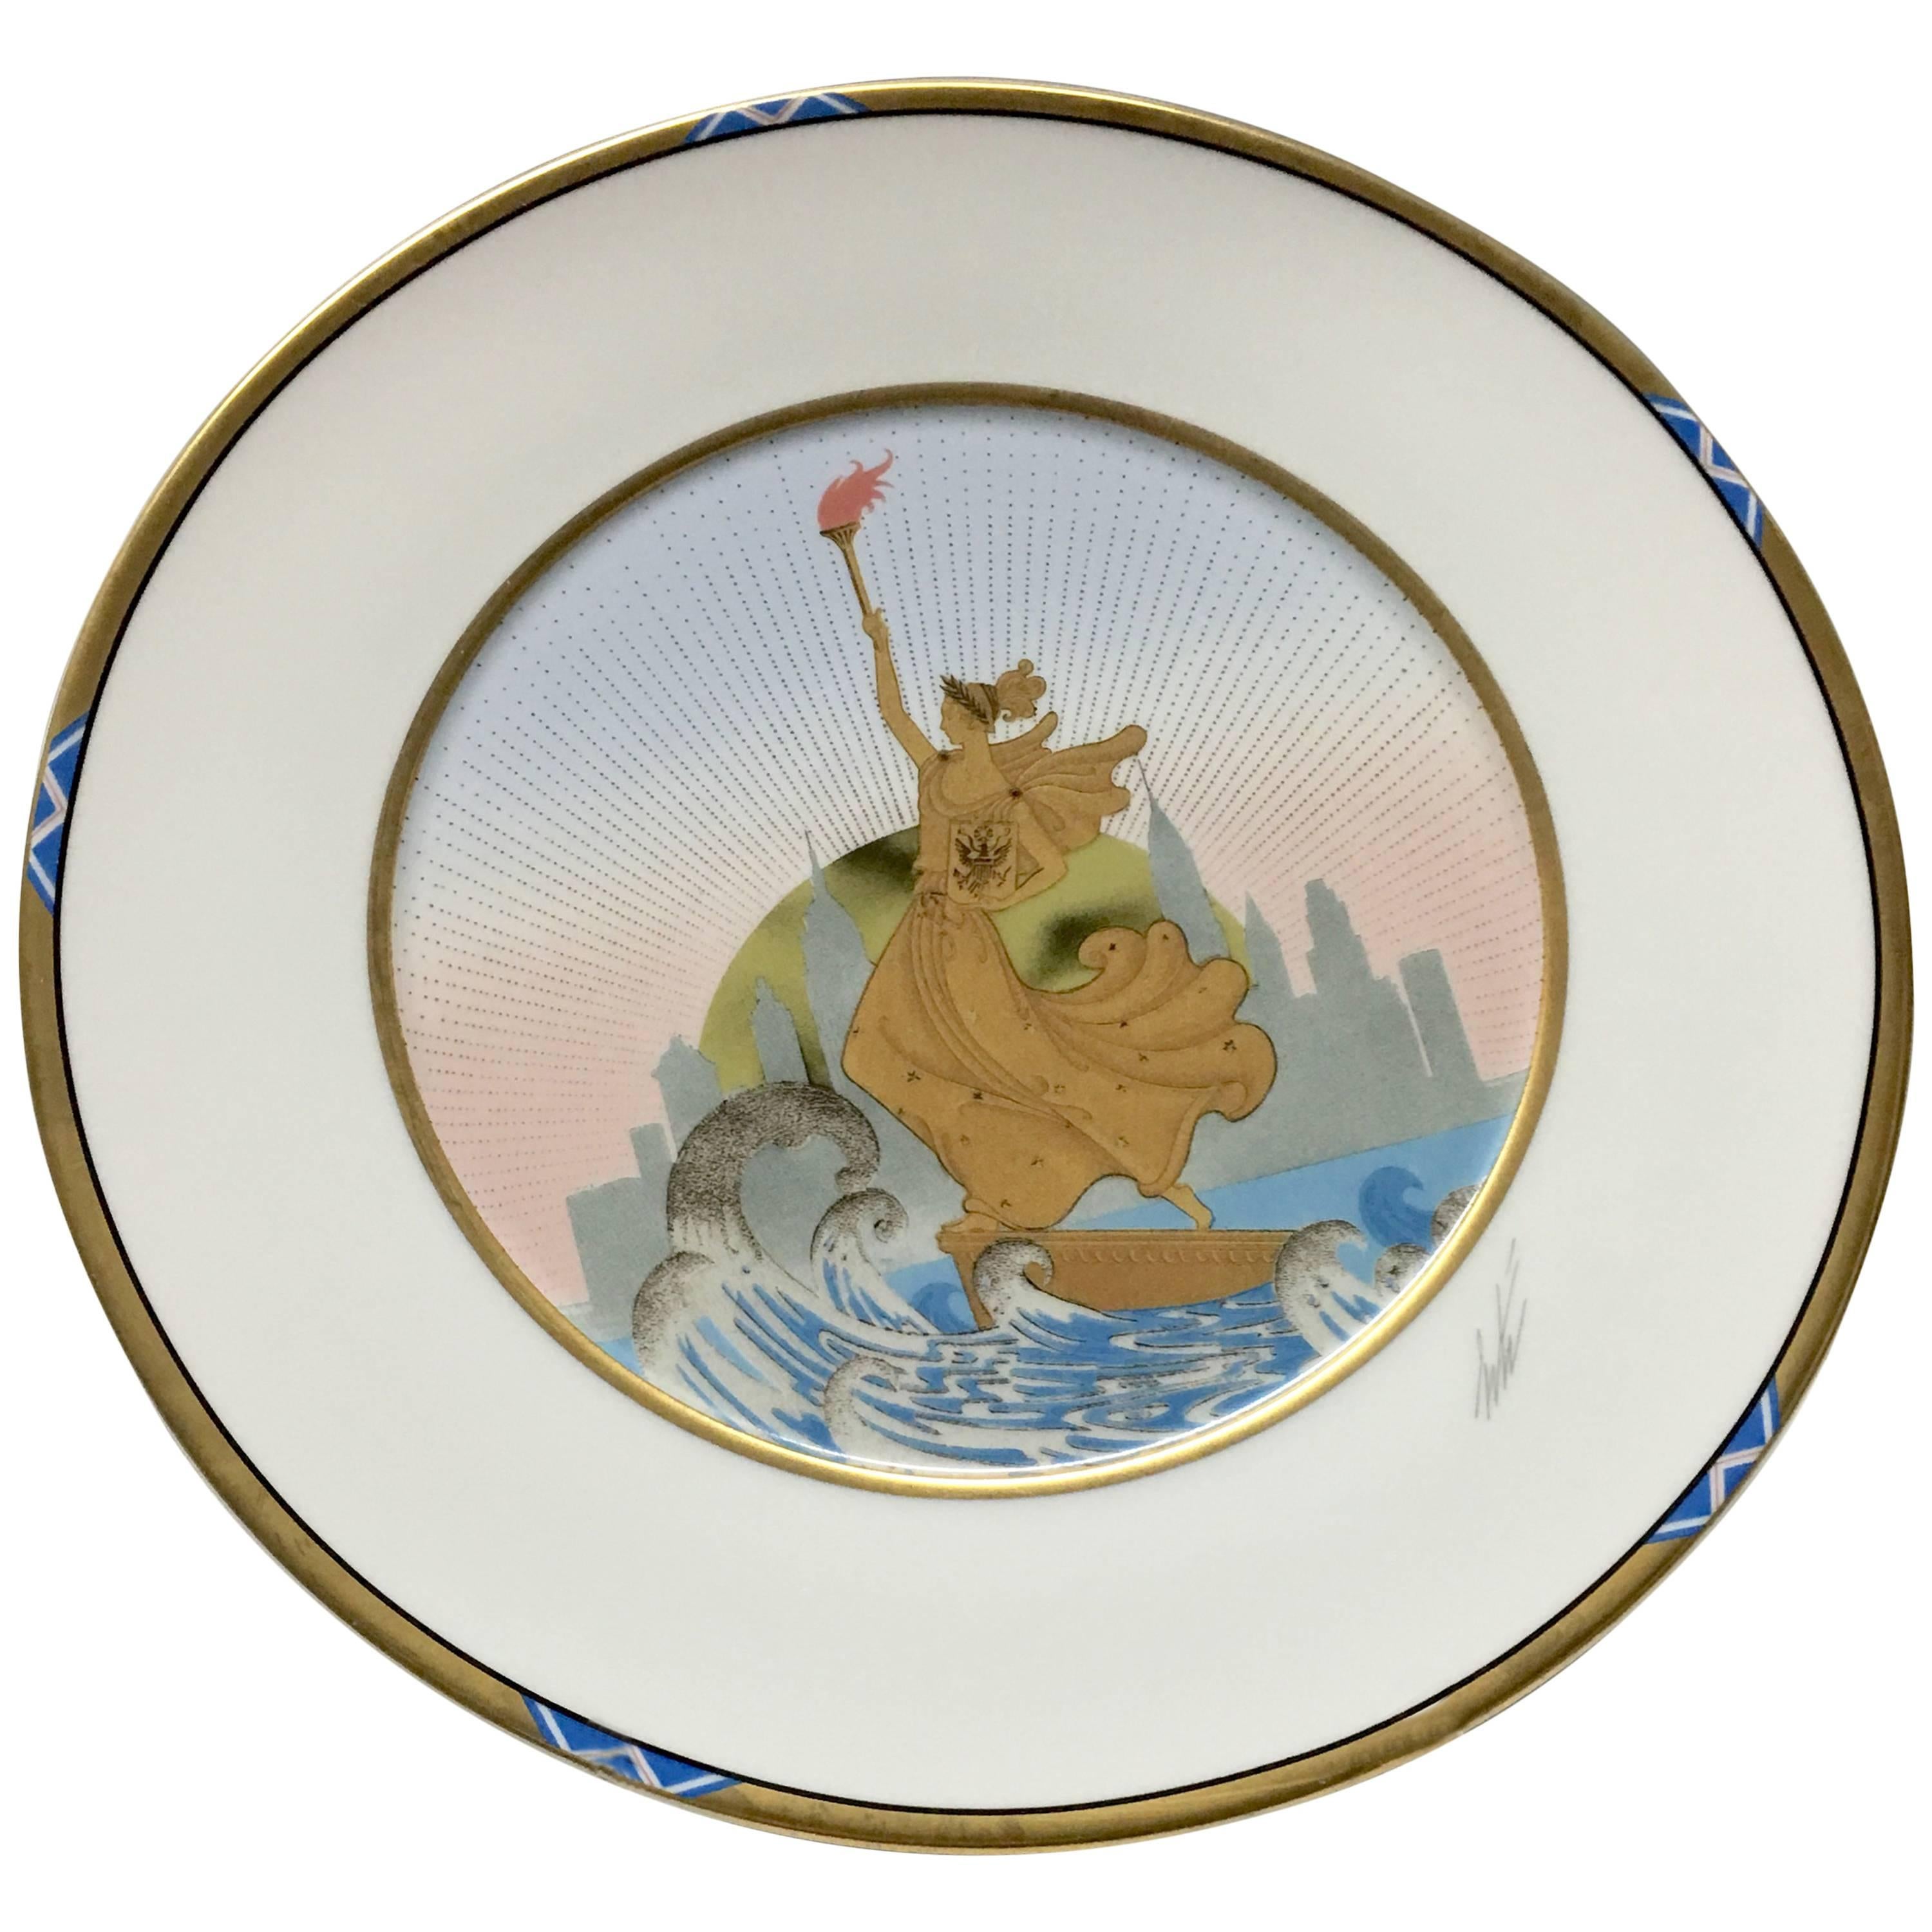 Erte Limited Edition Statue of Liberty Porcelain Charger Plate